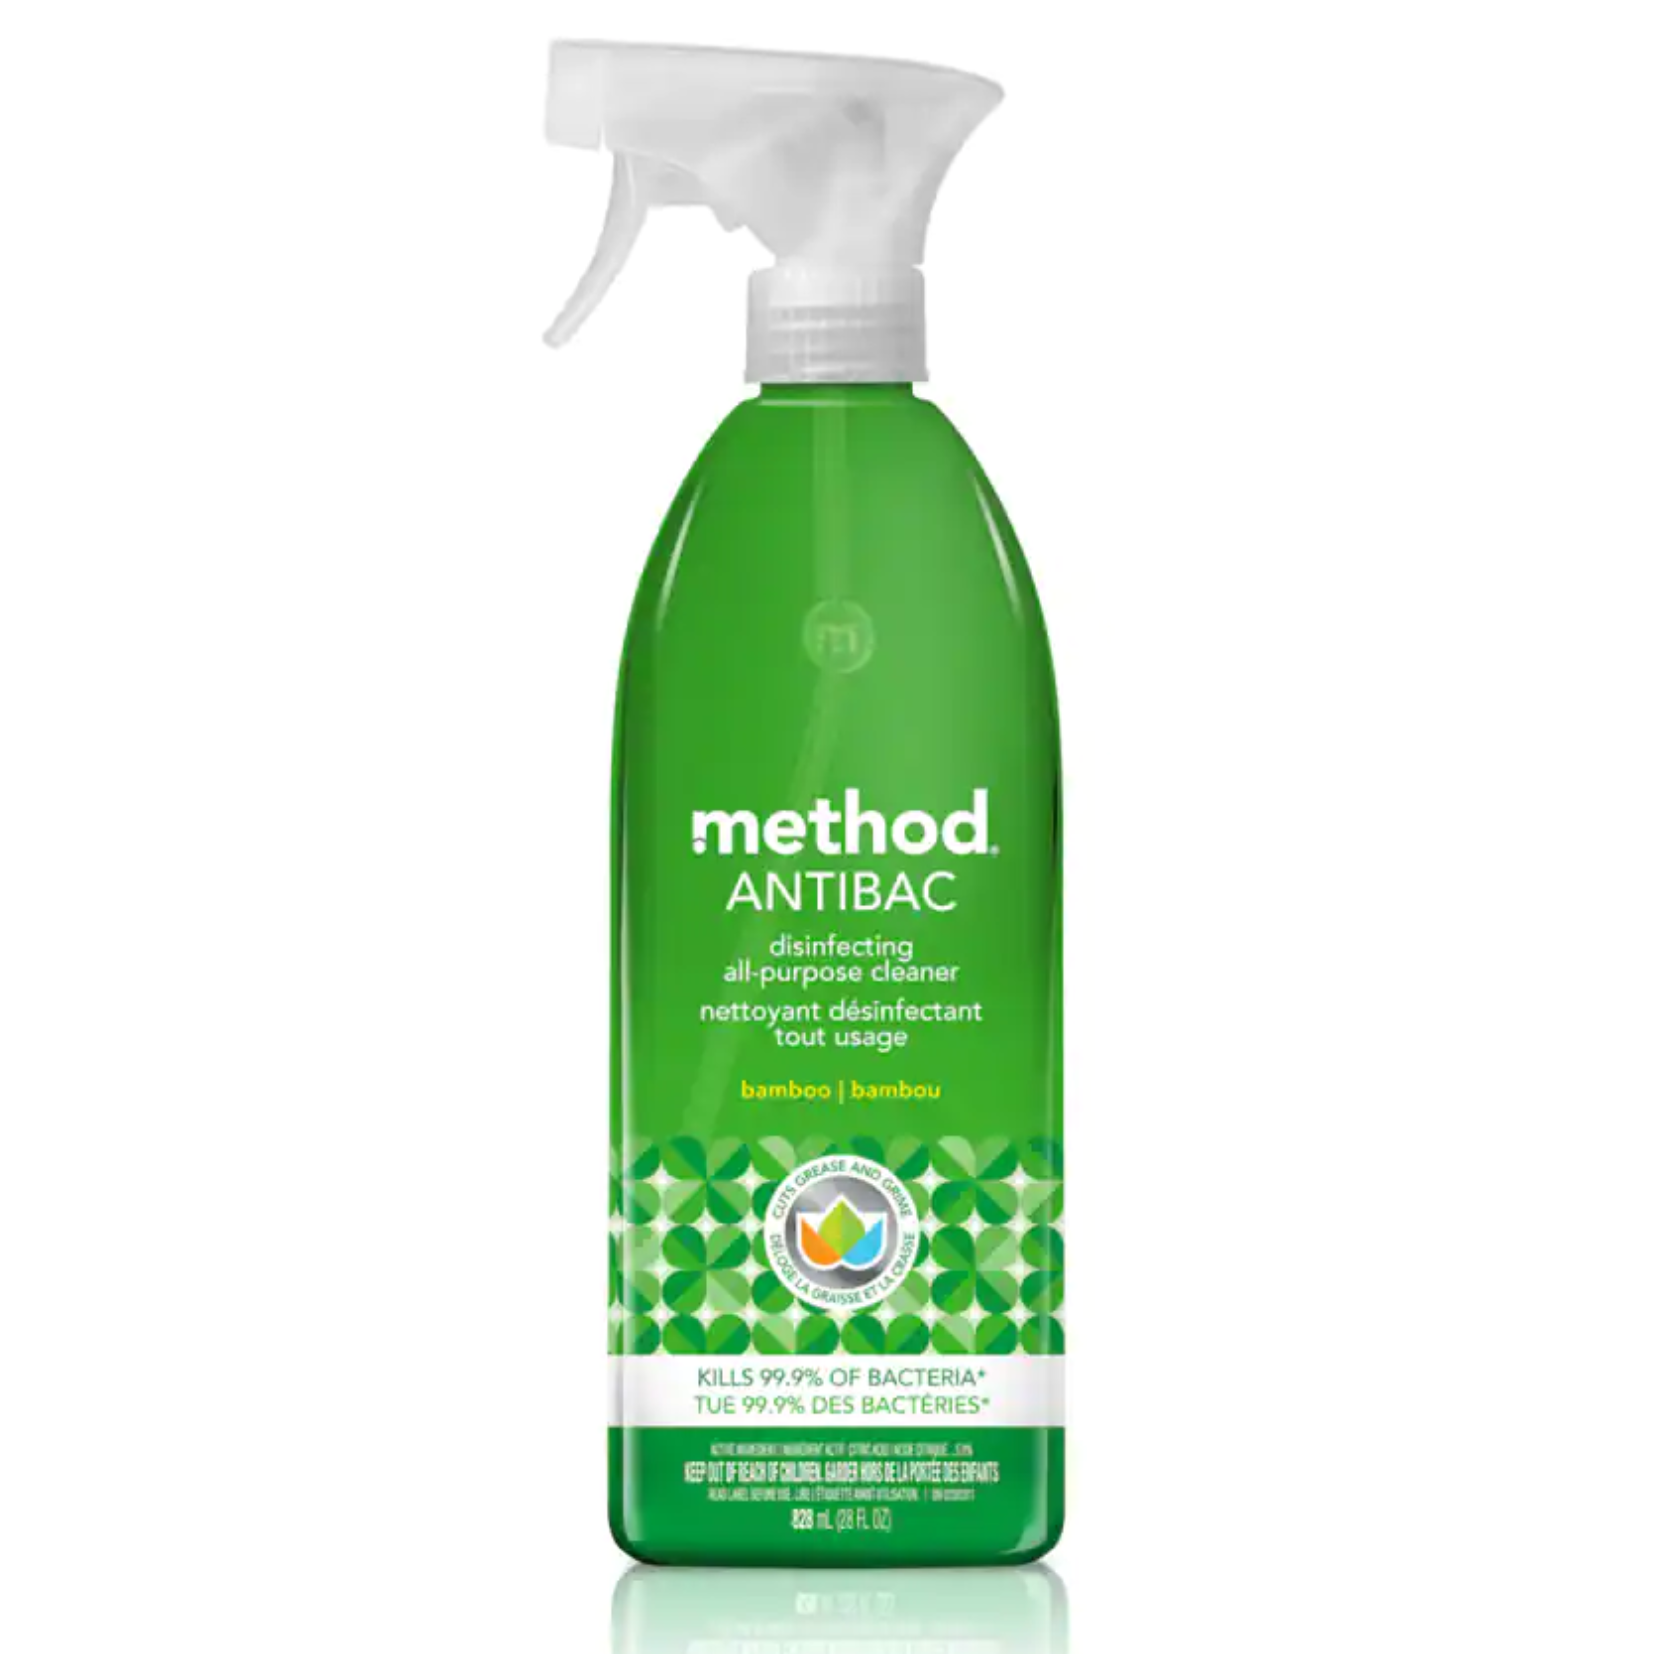 Method Bamboo Scented Antibac Disinfecting All-Purpose Cleaner 828ml